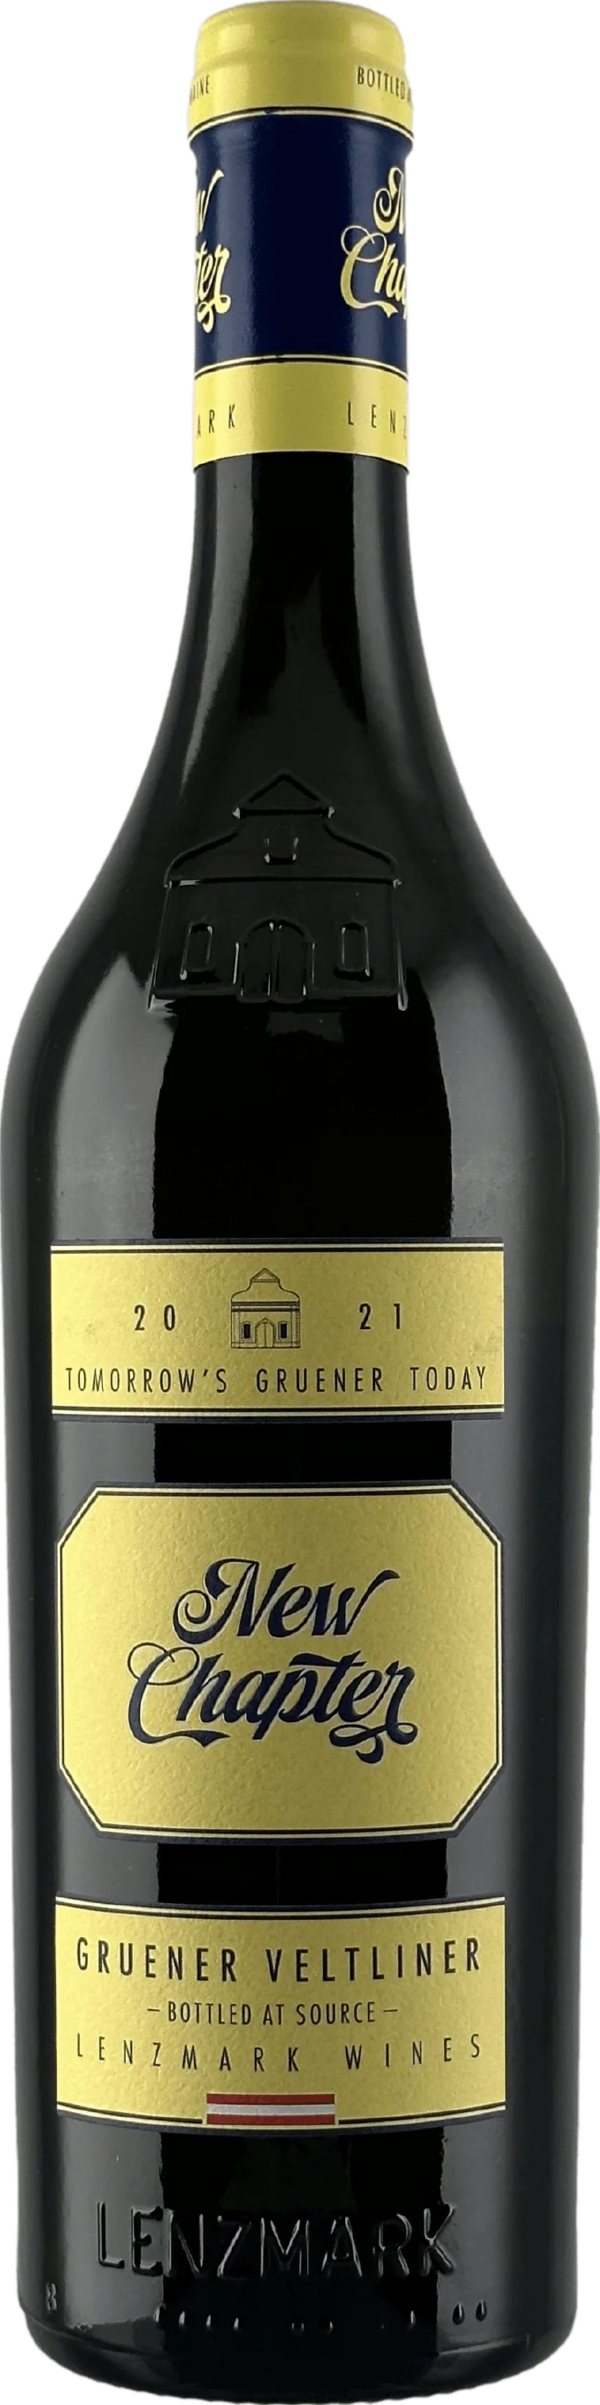 Product image of New Chapter Gruner Veltliner 2021 from 8wines